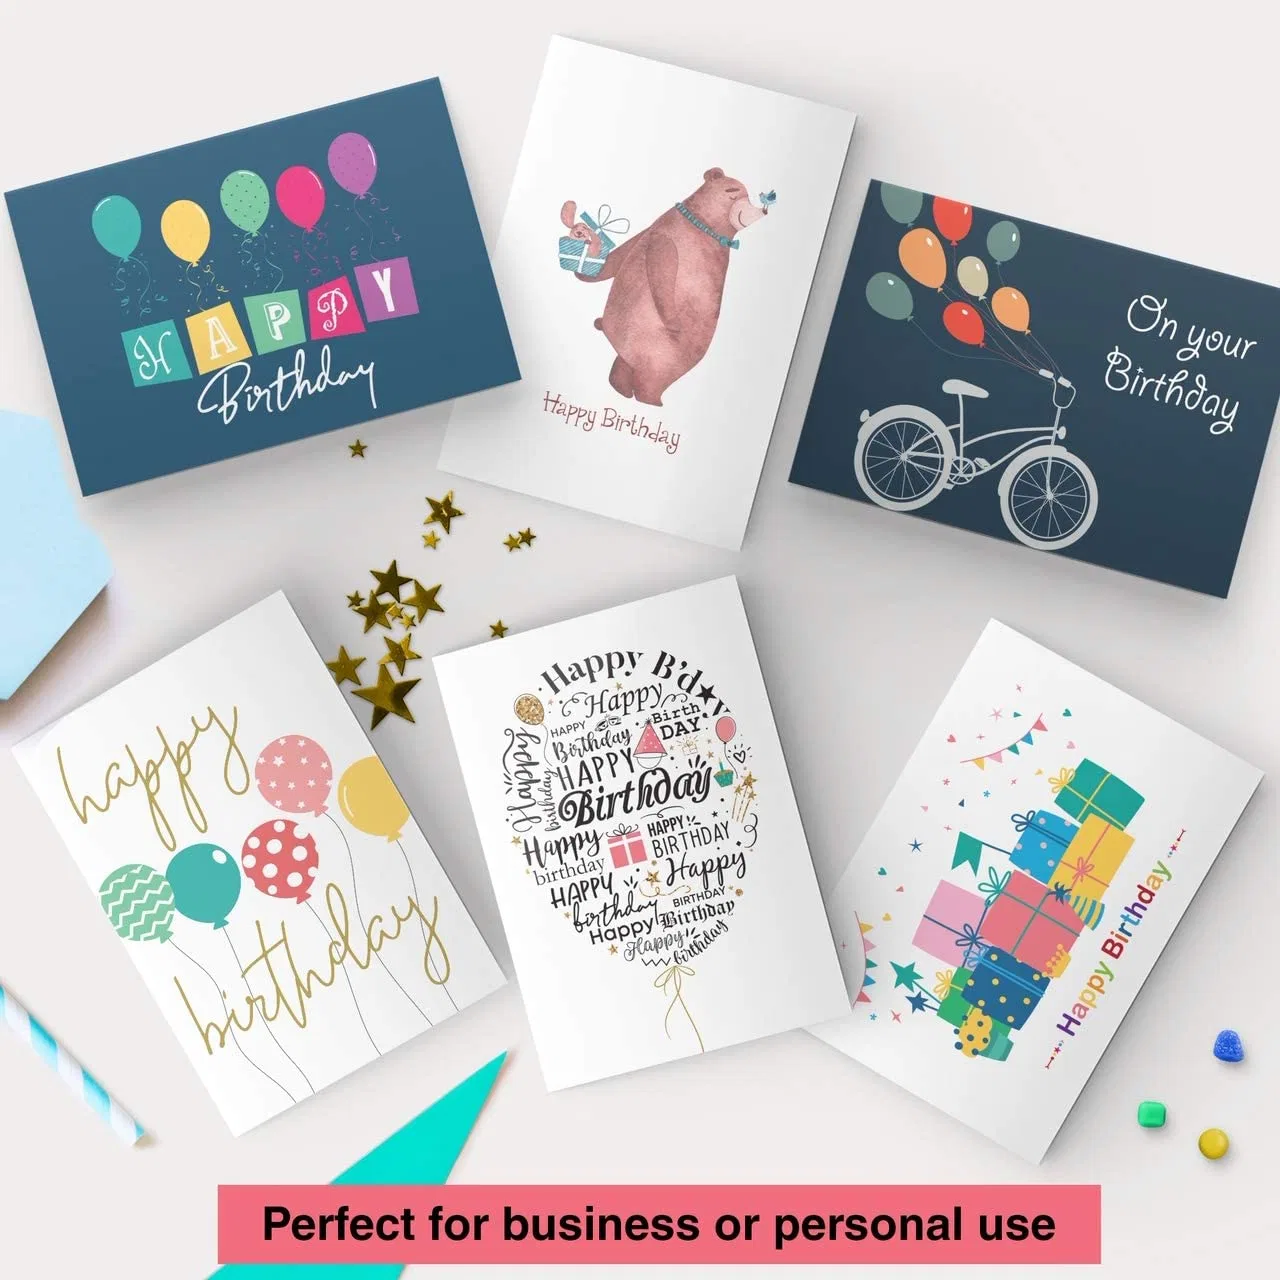 Custom Happy Birthday Thank You Cards Wholesale/Supplier Invitation Cards Wedding Greeting Card Paper Customized Card